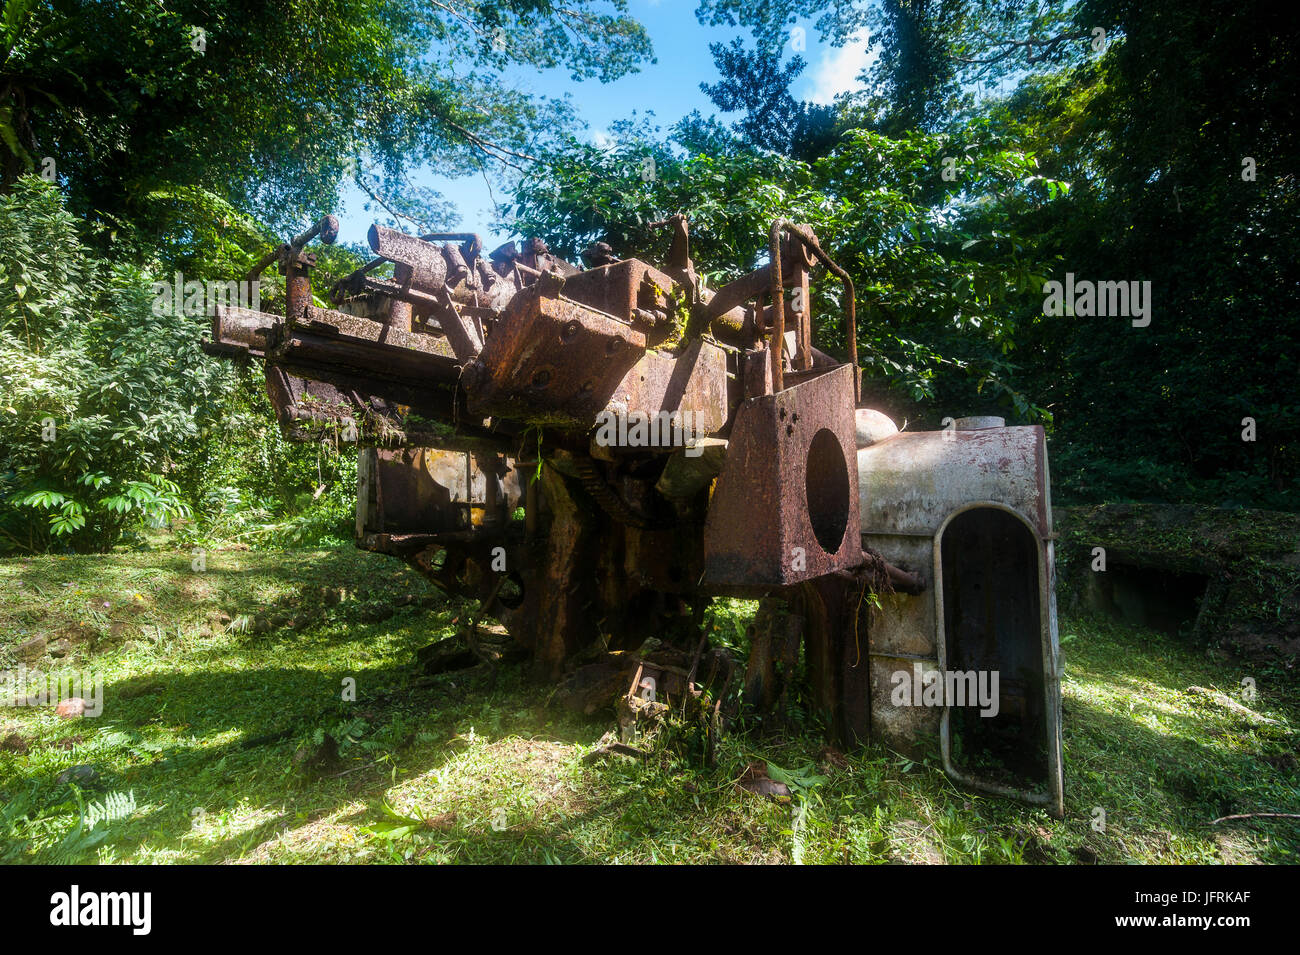 Old second world war cannons in the island of Pohnpei, Micronesia, Central Pacific Stock Photo